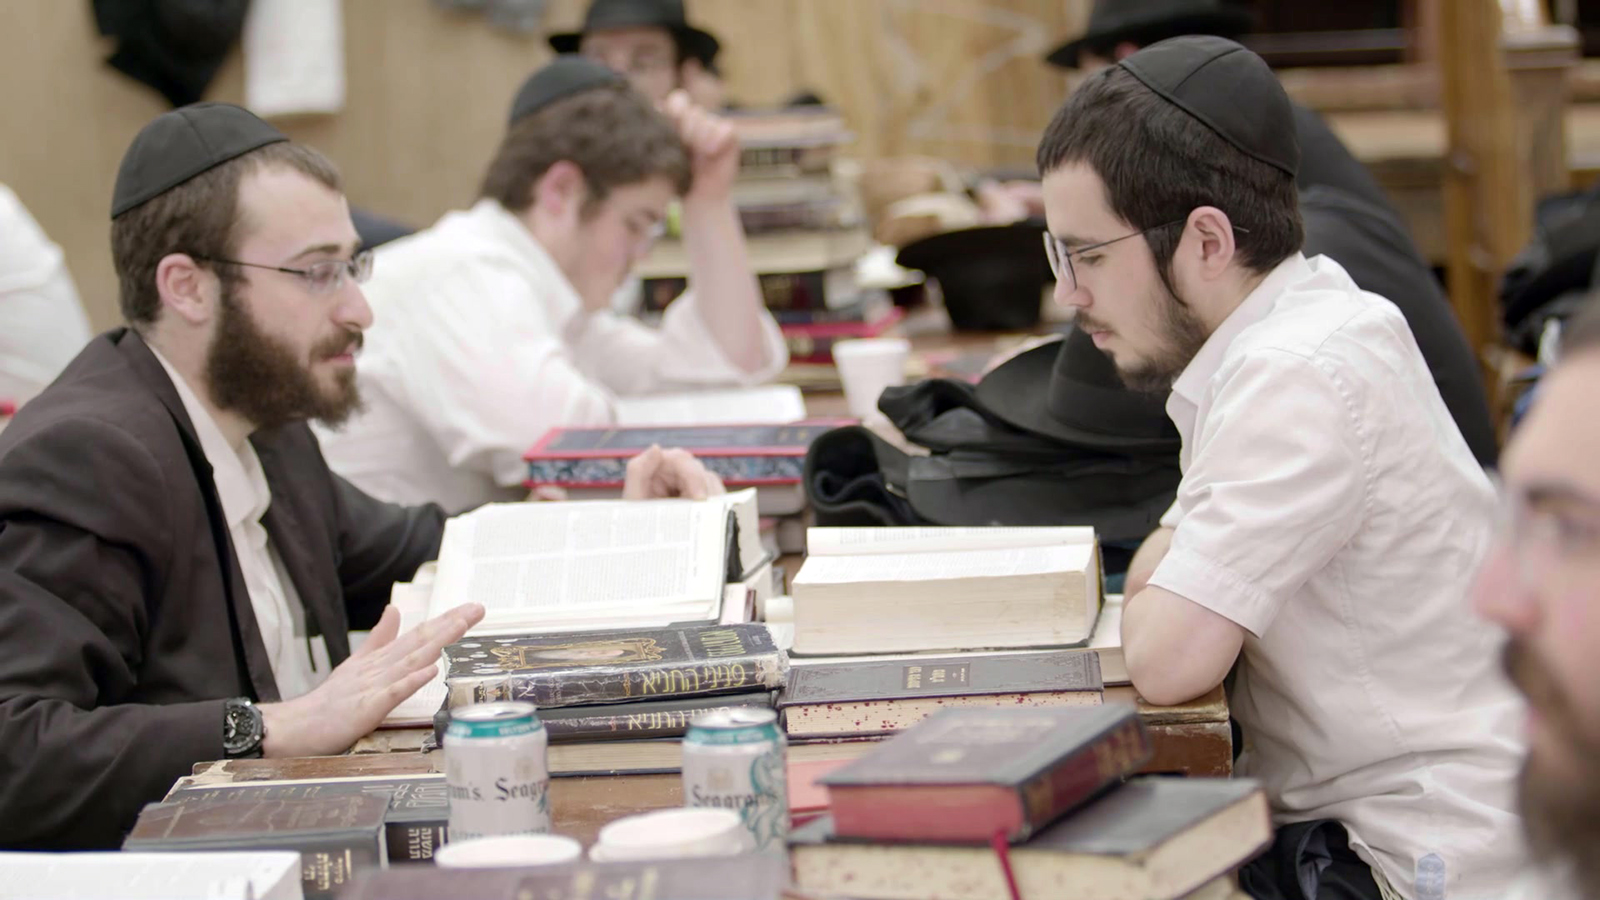 A still of students studying in Brooklyn, New York, in the documentary “Sabbath." Image courtesy Journey Films